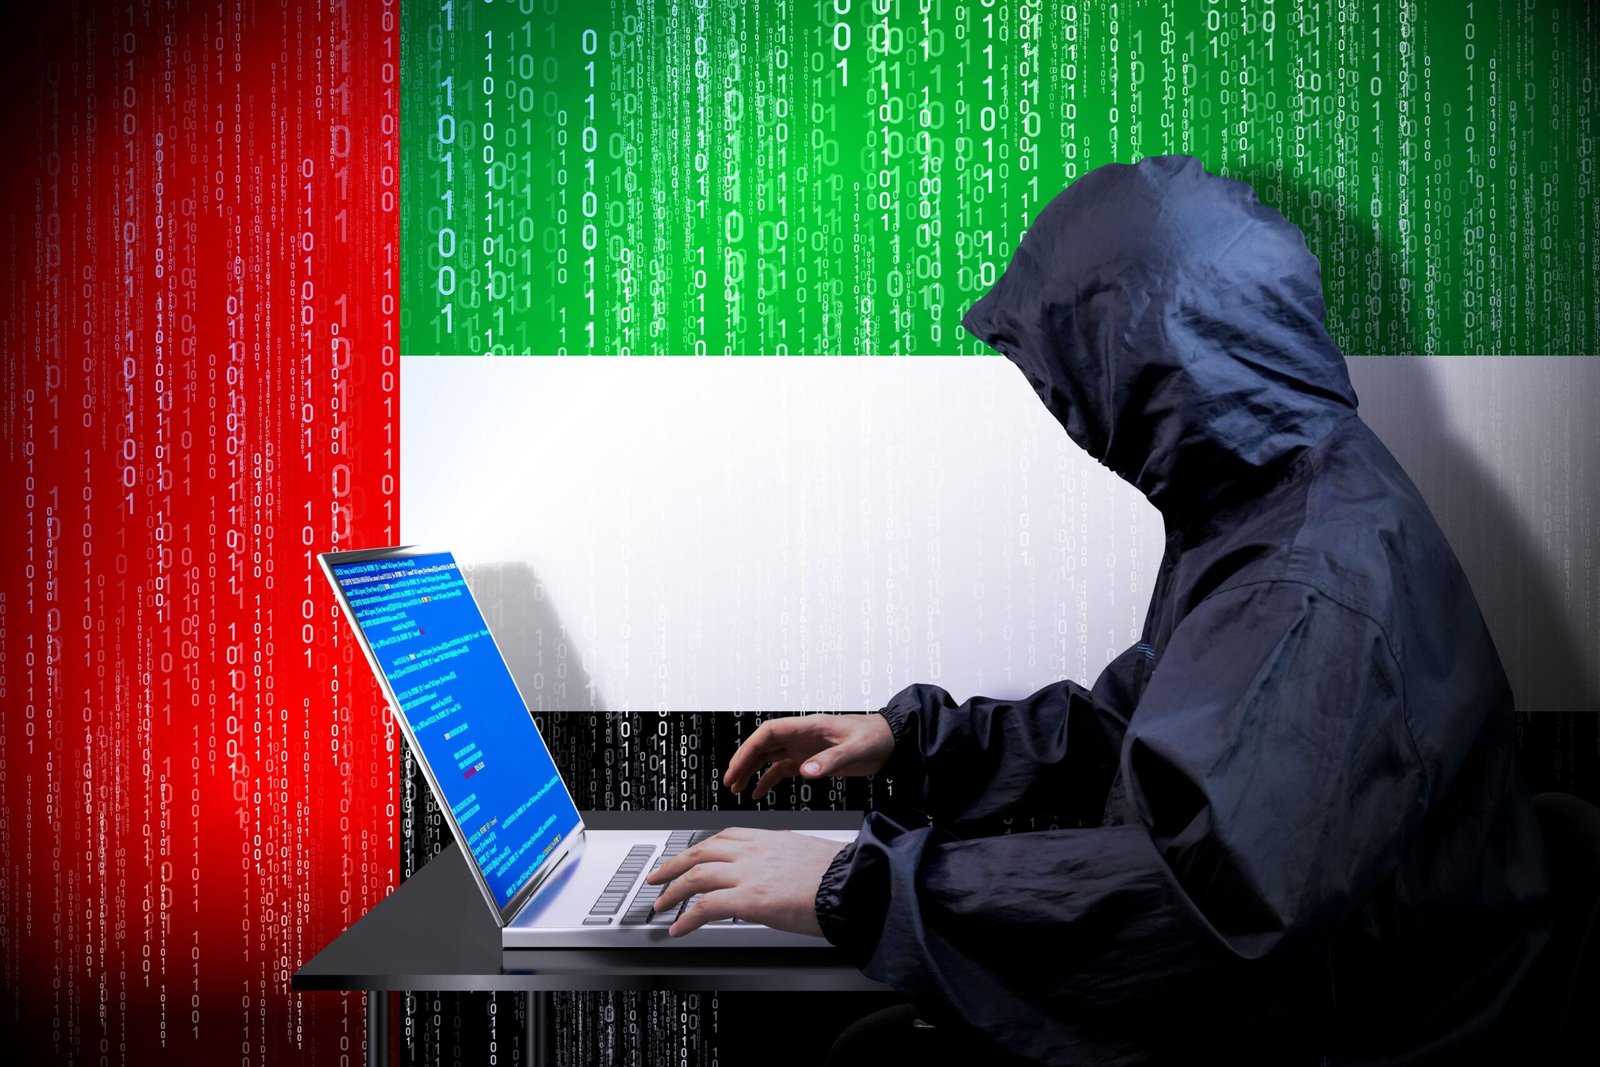 Rootkit Attack Detections Increase at UAE Businesses – Source: www.darkreading.com